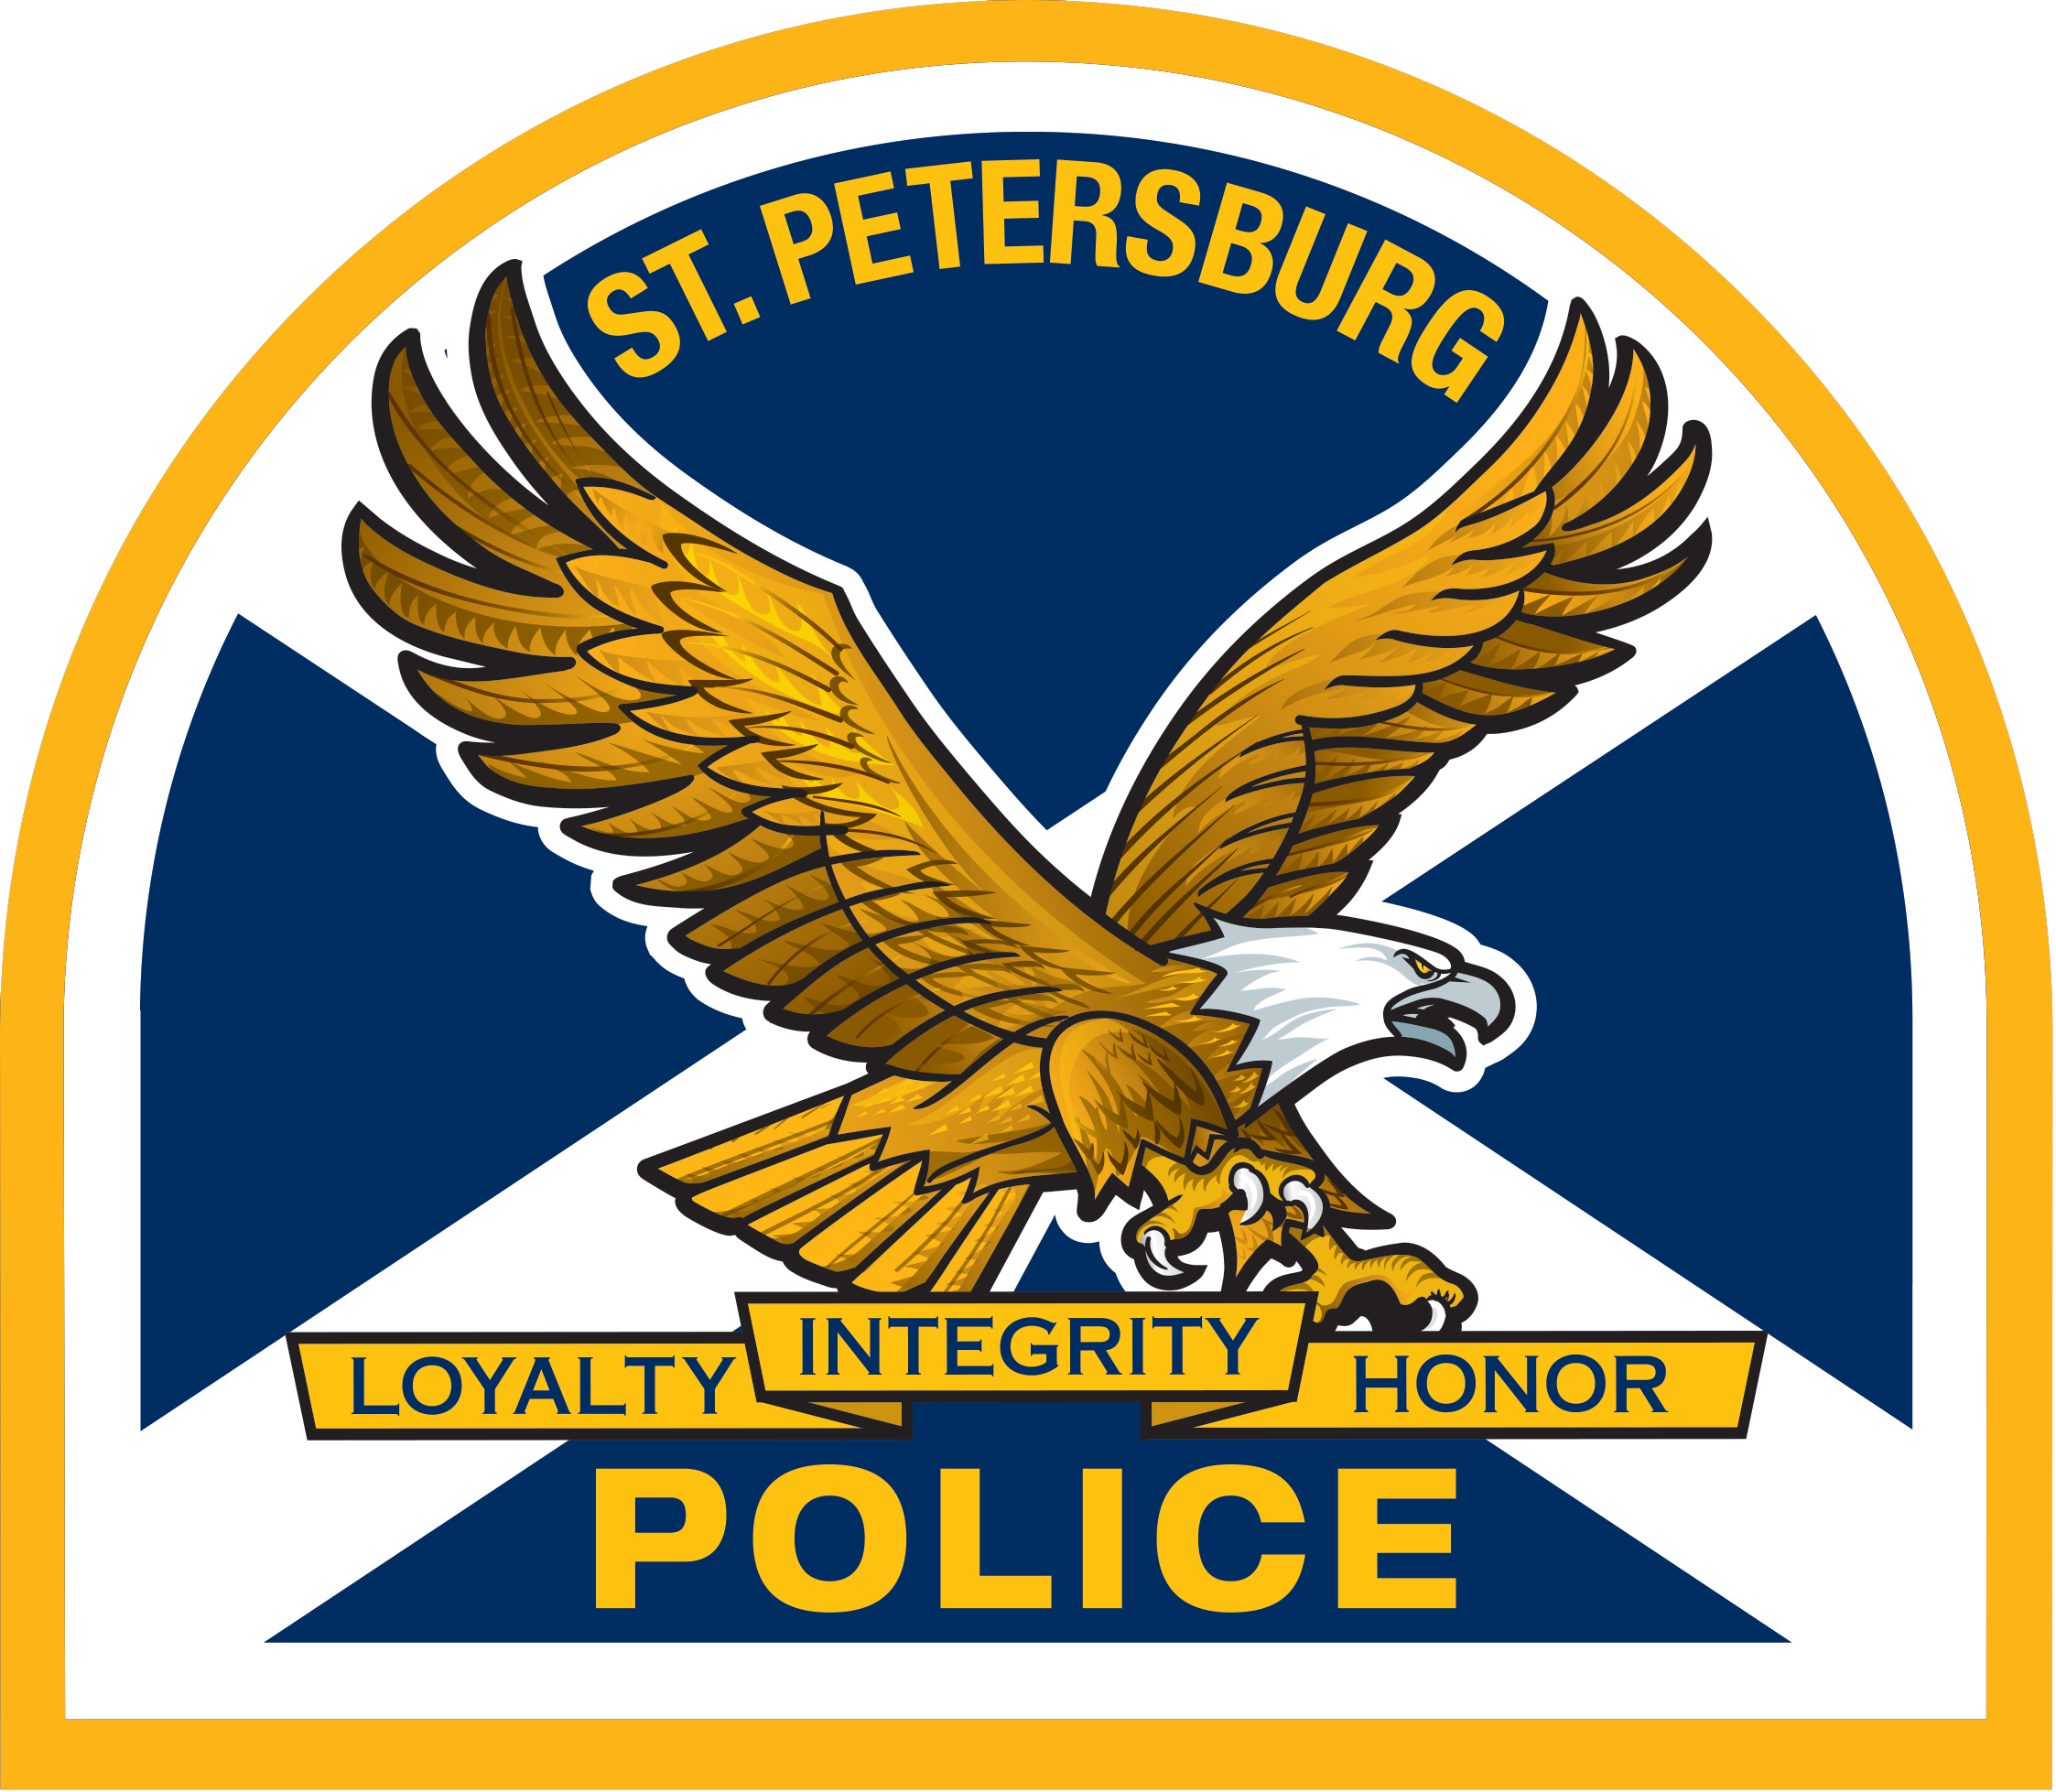 St. Petersburg Police patch. Loyalty, Integrity, Honor.